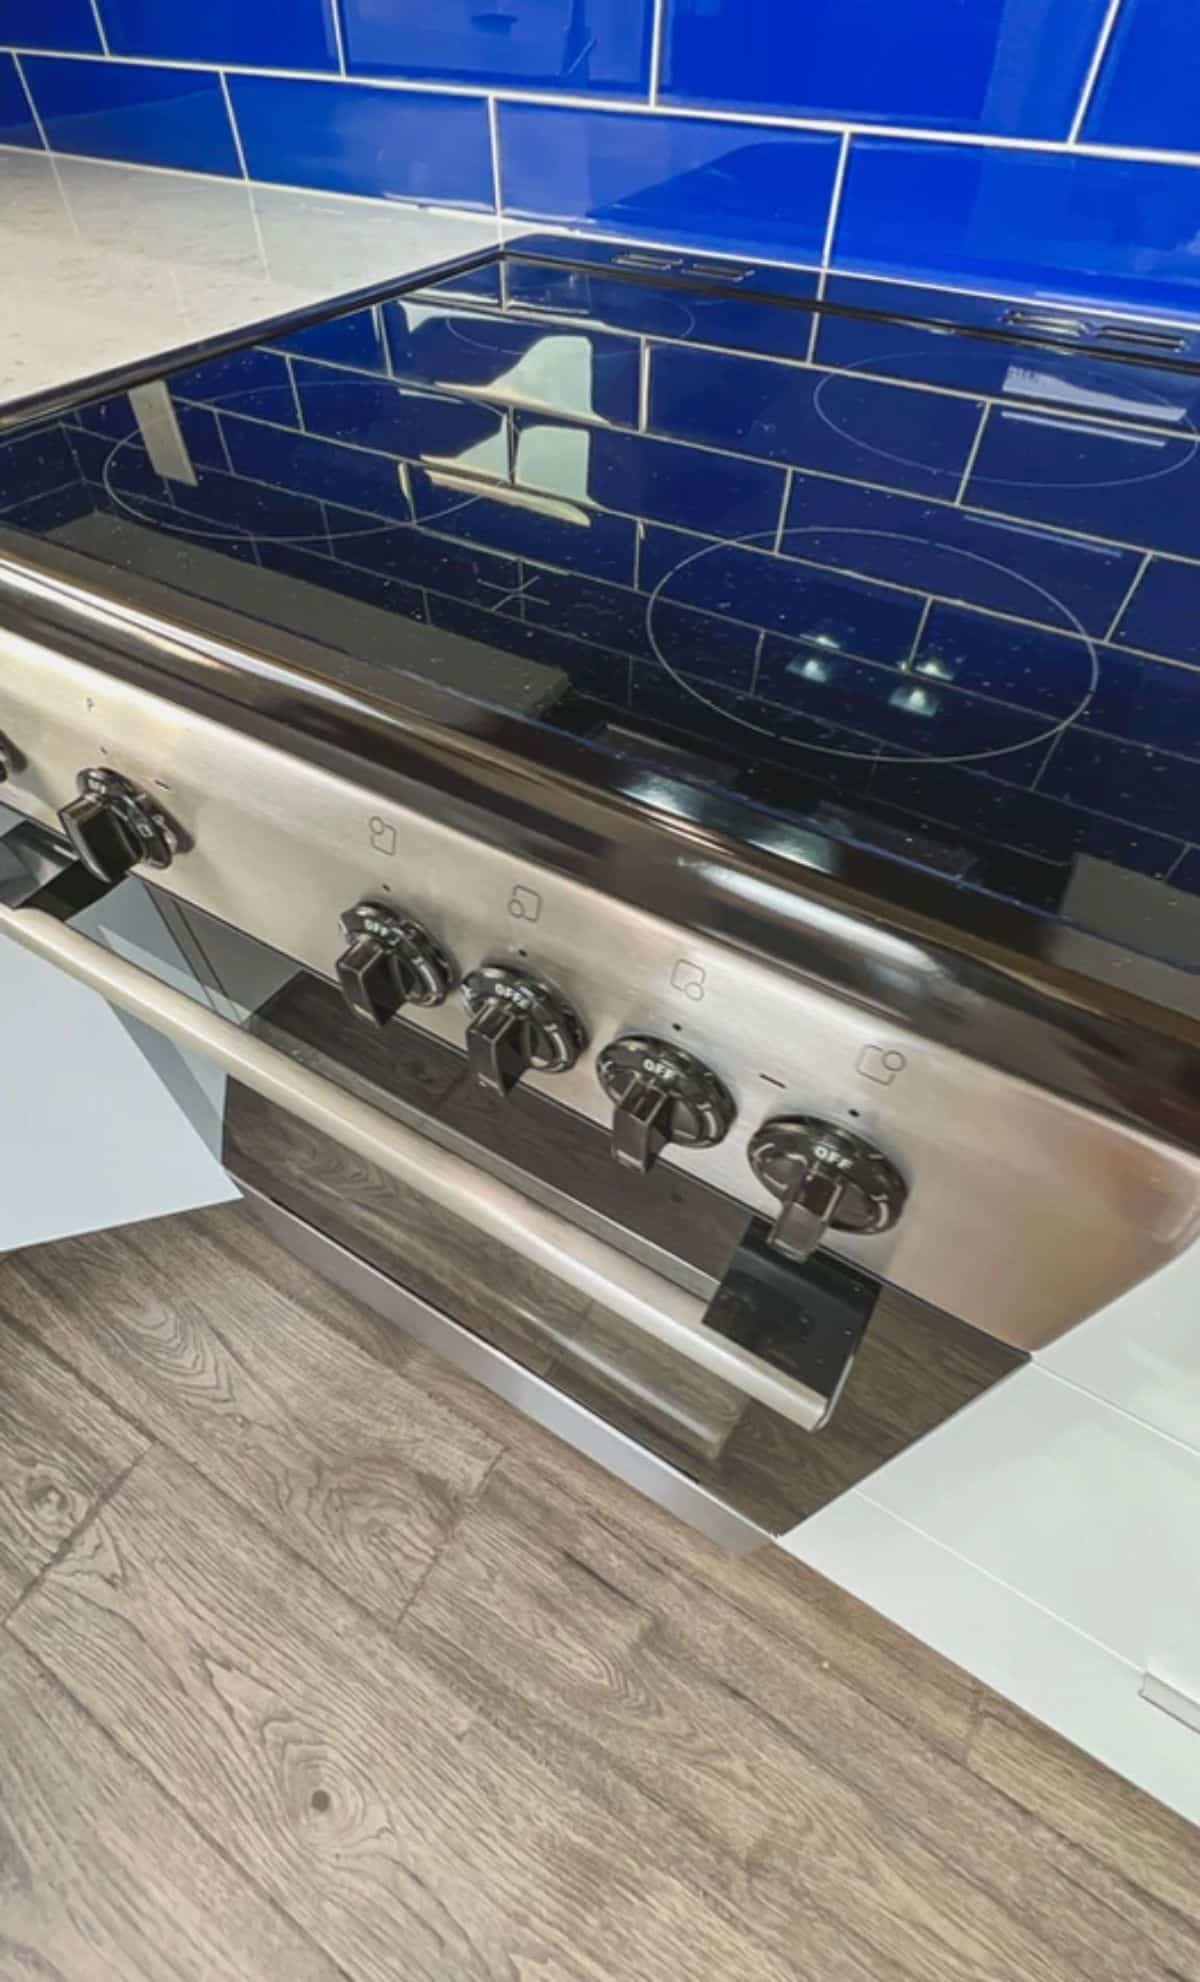 stainless steel stovetop in white countertop